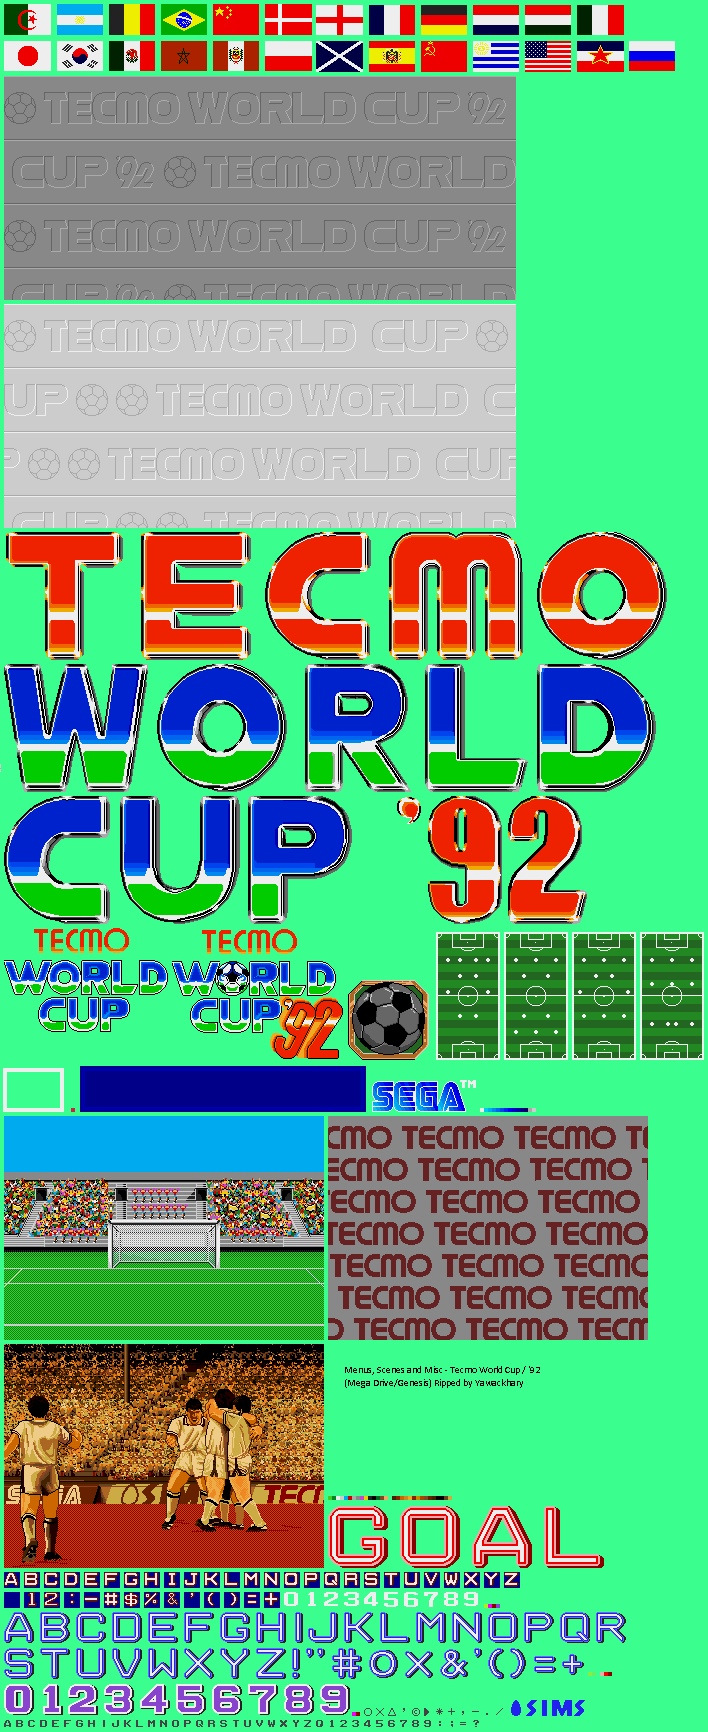 Tecmo World Cup / Tecmo World Cup '92 - Menus, Scenes and Miscellaneous